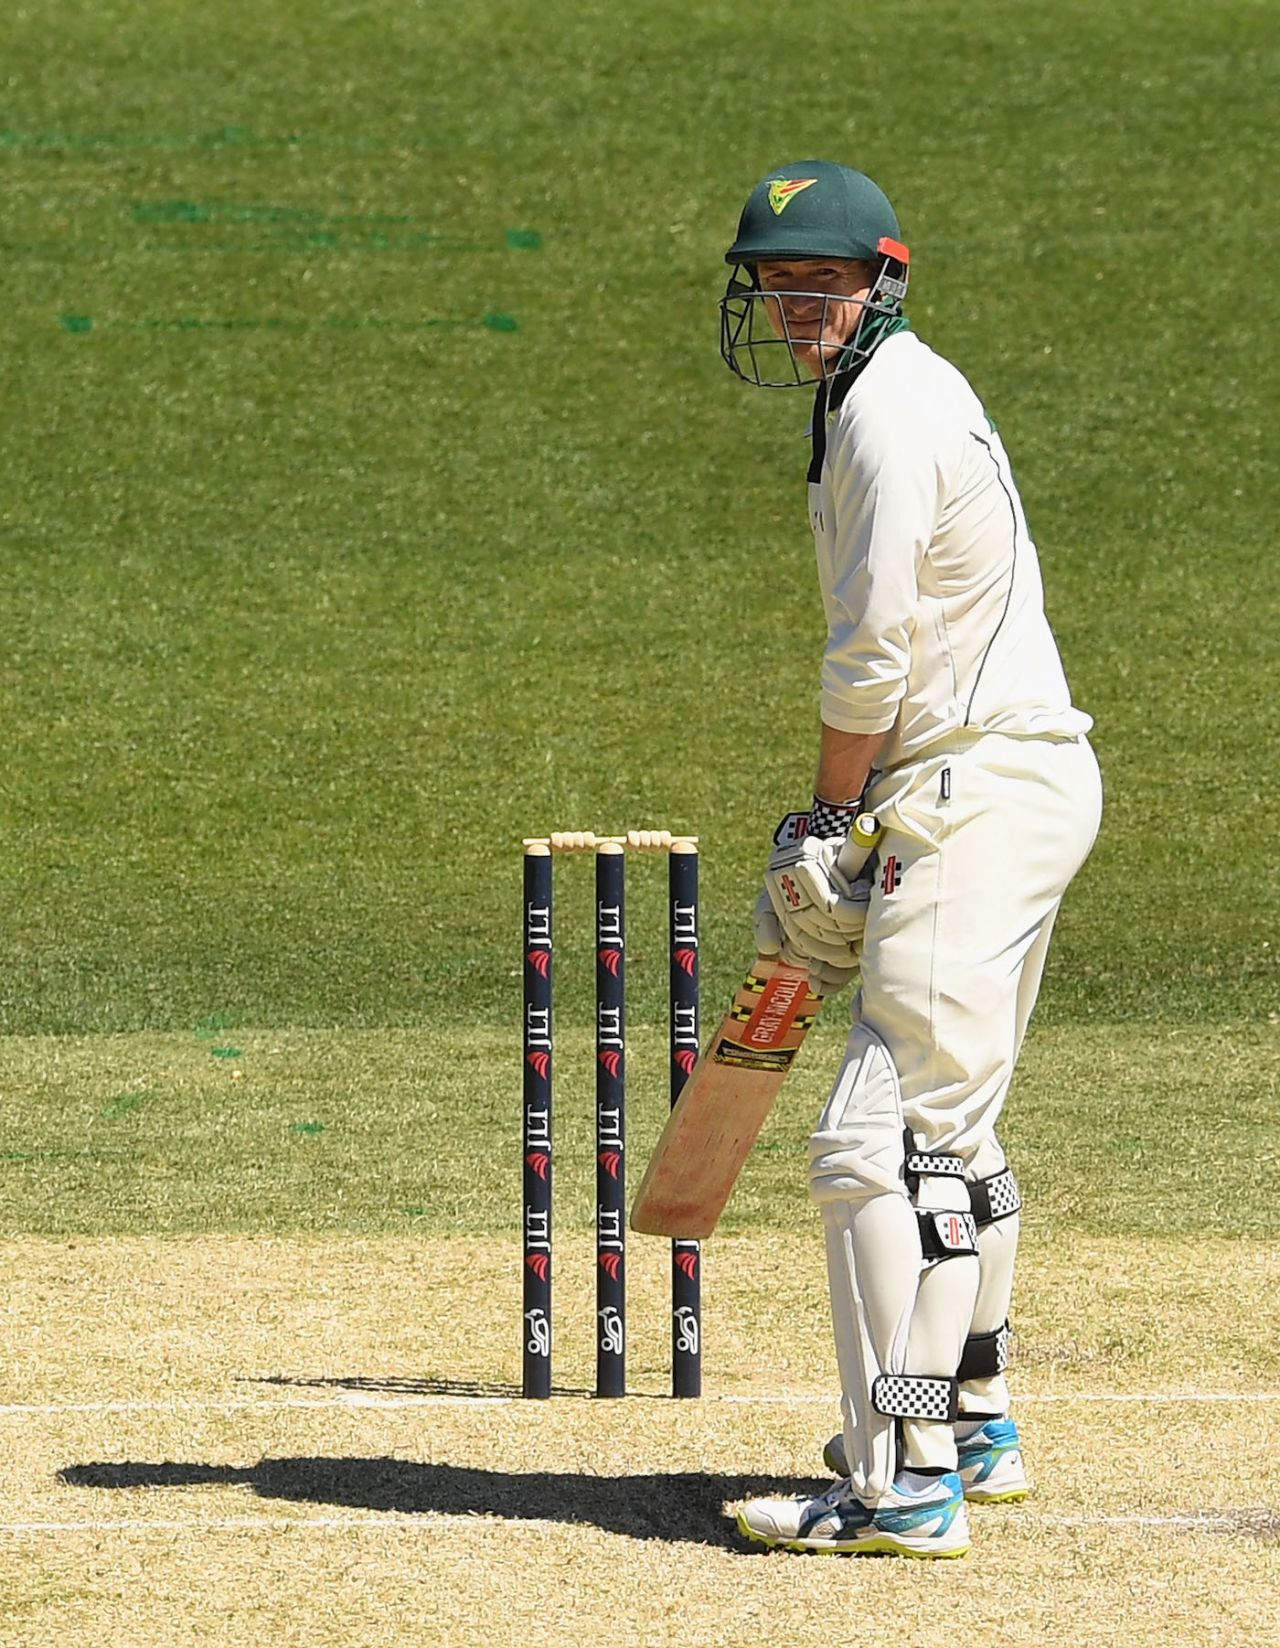 George Bailey stands at the crease, day one, Sheffield Shield match, Victoria v Tasmania, Melbourne Cricket Ground, November 13, 2017, Melbourne, Australia.